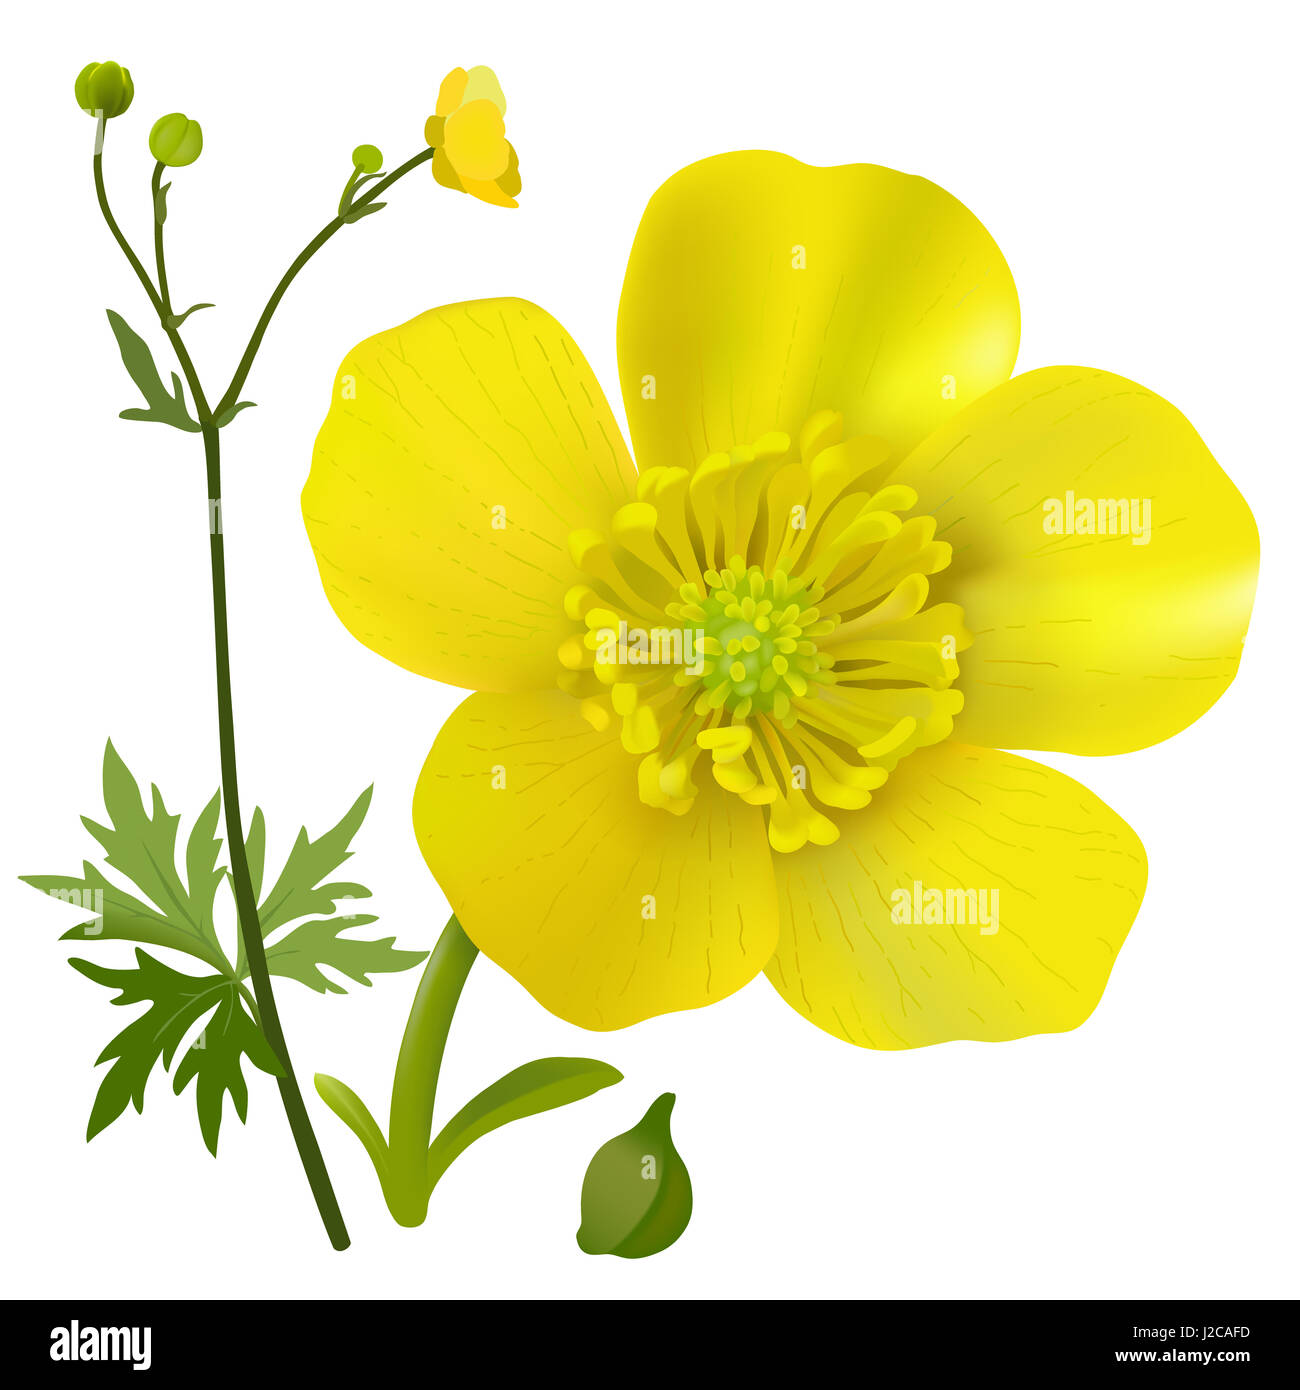 Buttercup - Ranunculus. Hand drawn digital illustration of a yellow wildflower in realistic style, on white background. Stock Photo